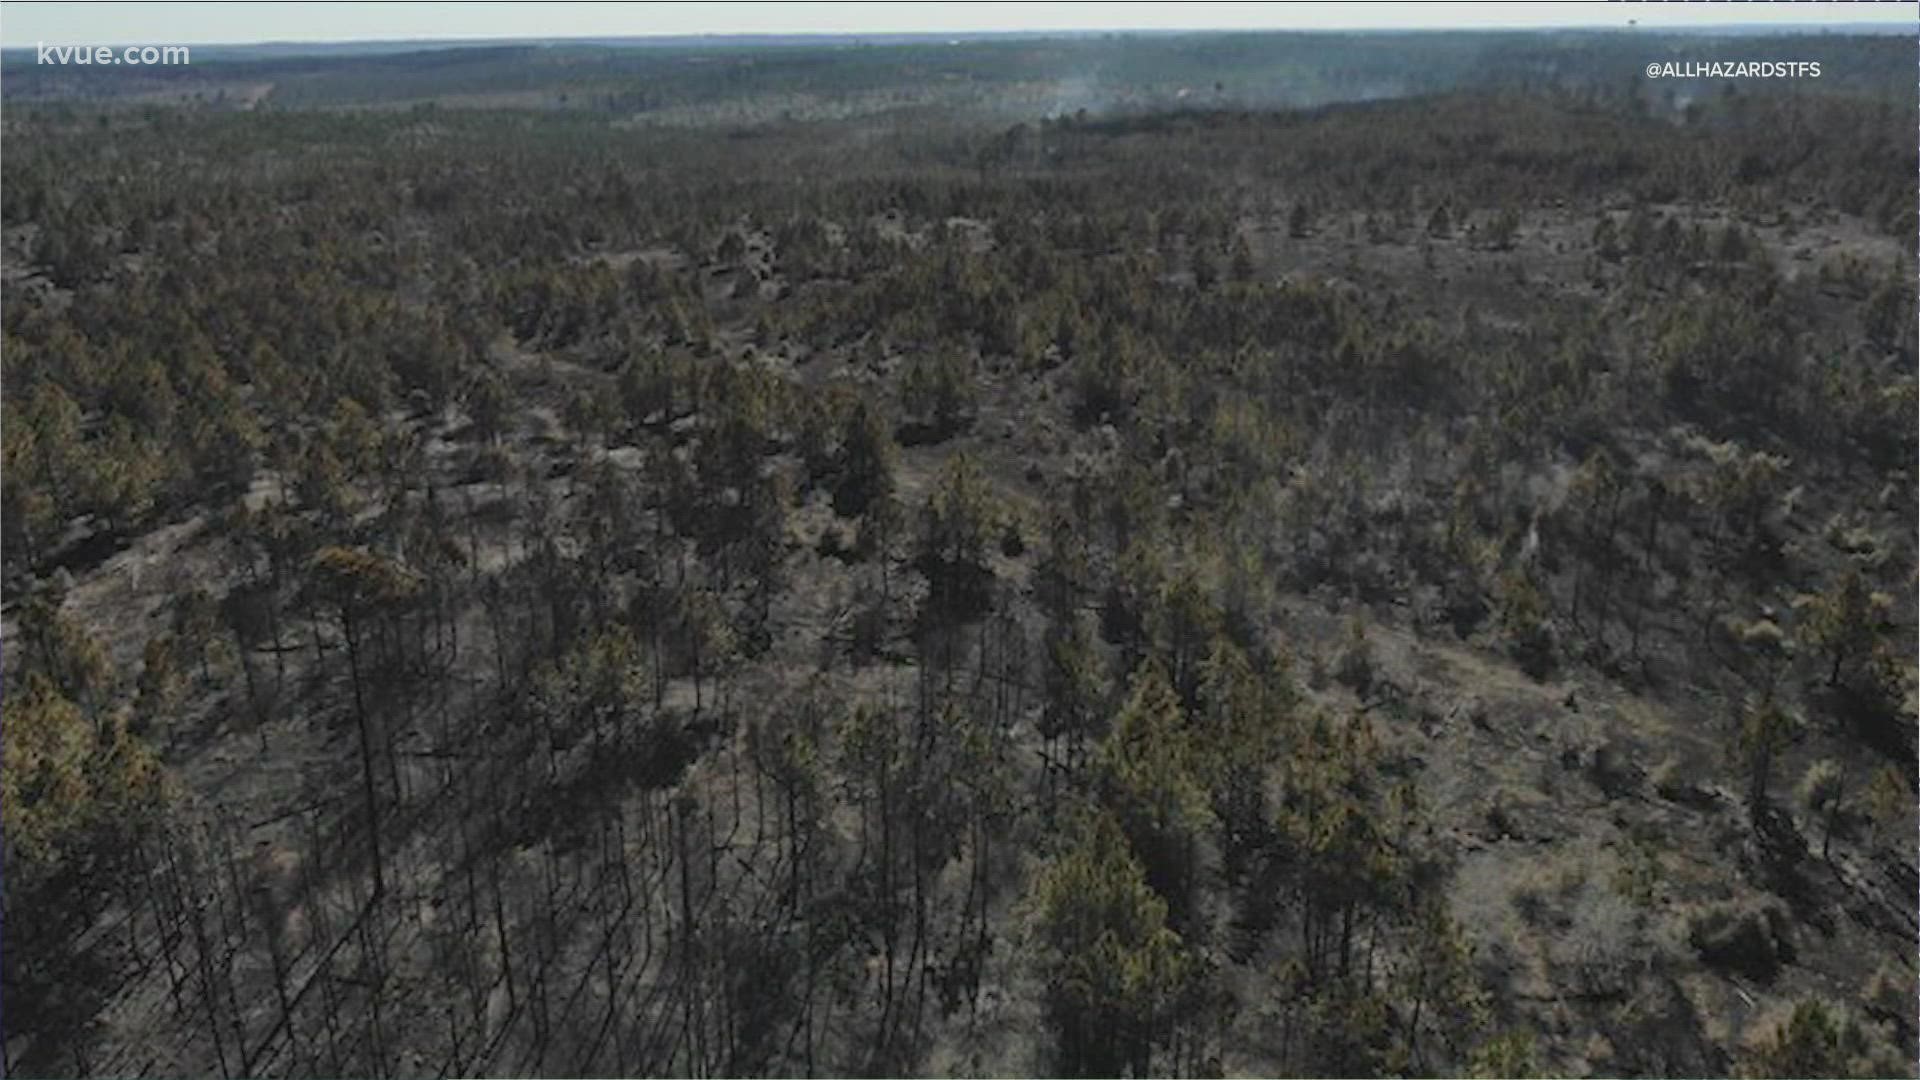 A panel reviewed the prescribed burn that caused Bastrop Rolling Pines fire. TPWD hosted a town hall for Bastrop residents.